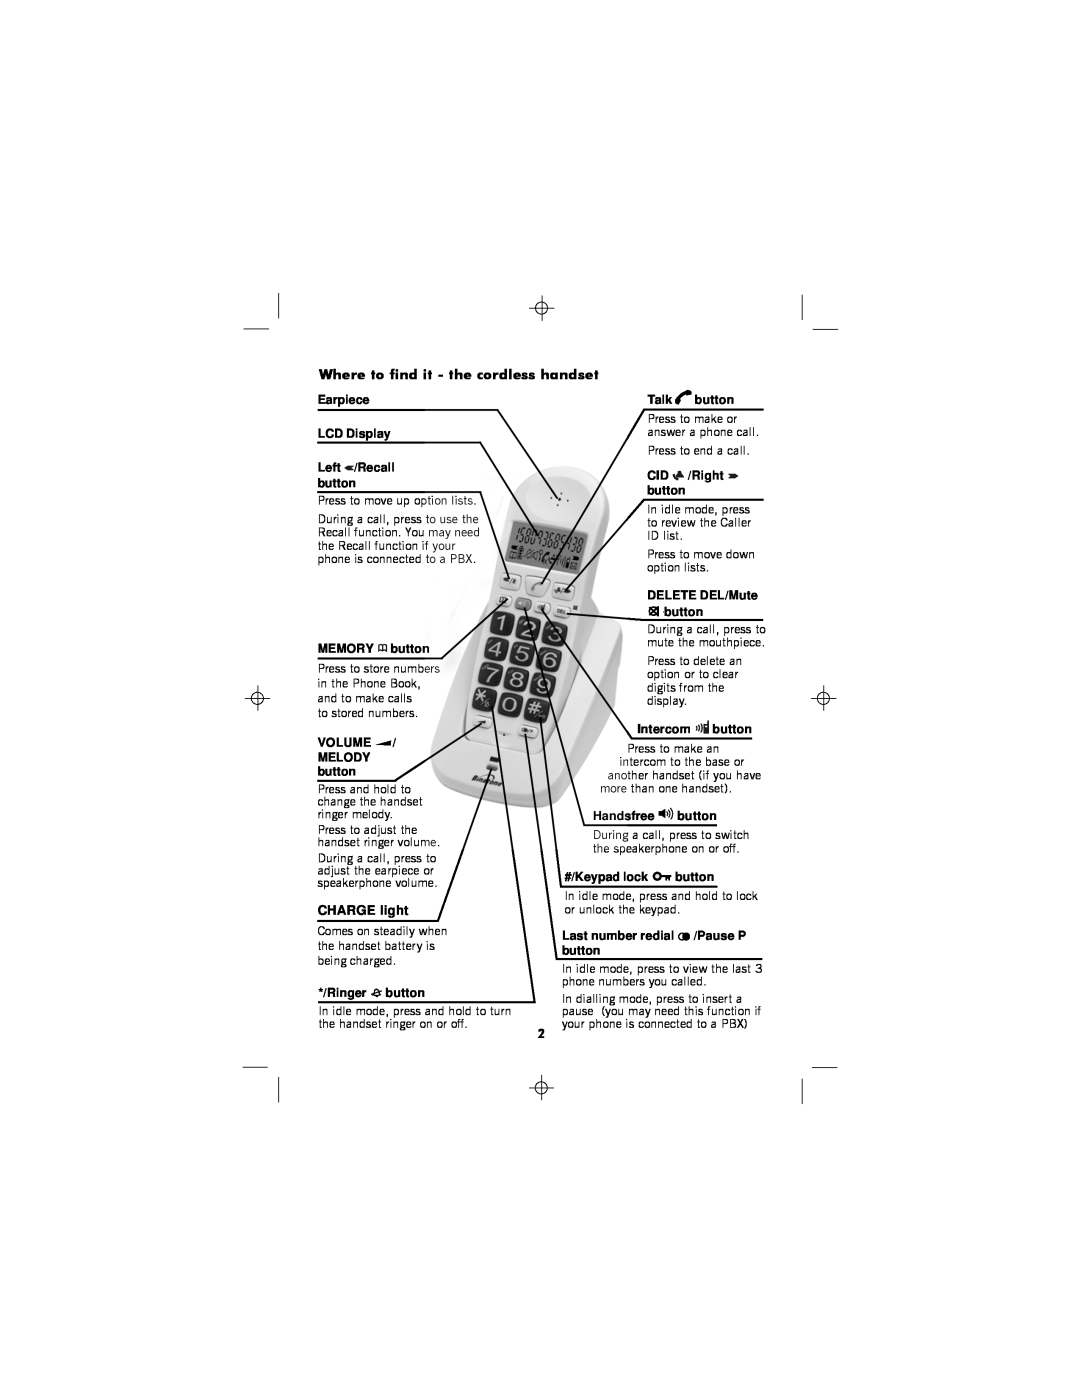 Binatone SC2050 manual Where to find it - the cordless handset, CHARGE light 